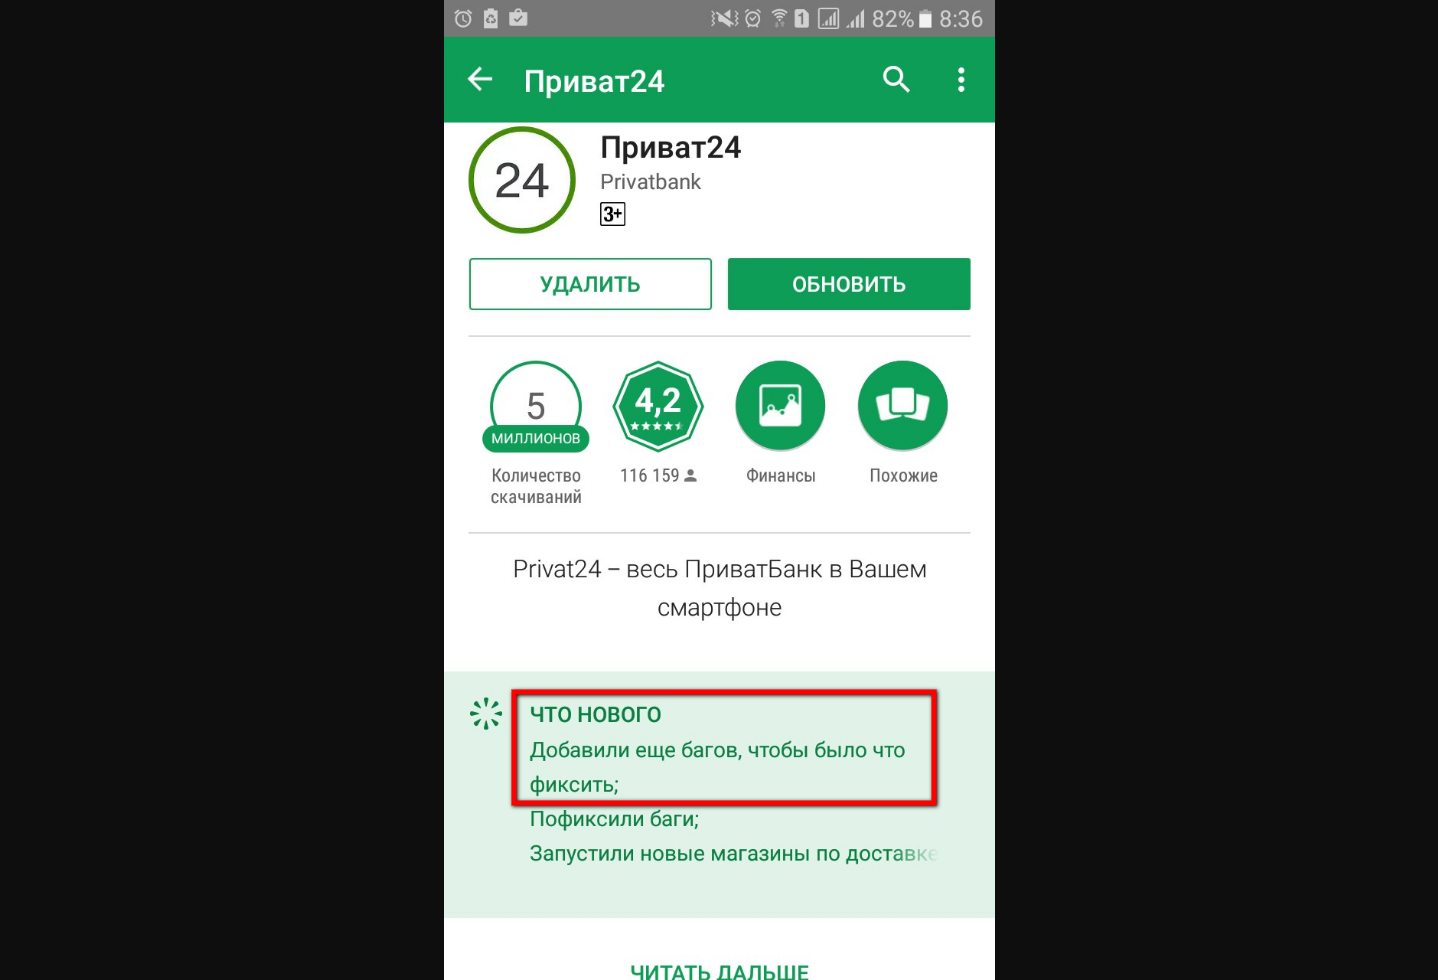 An interesting description from Privat Bank - My, , Privatbank, Android app